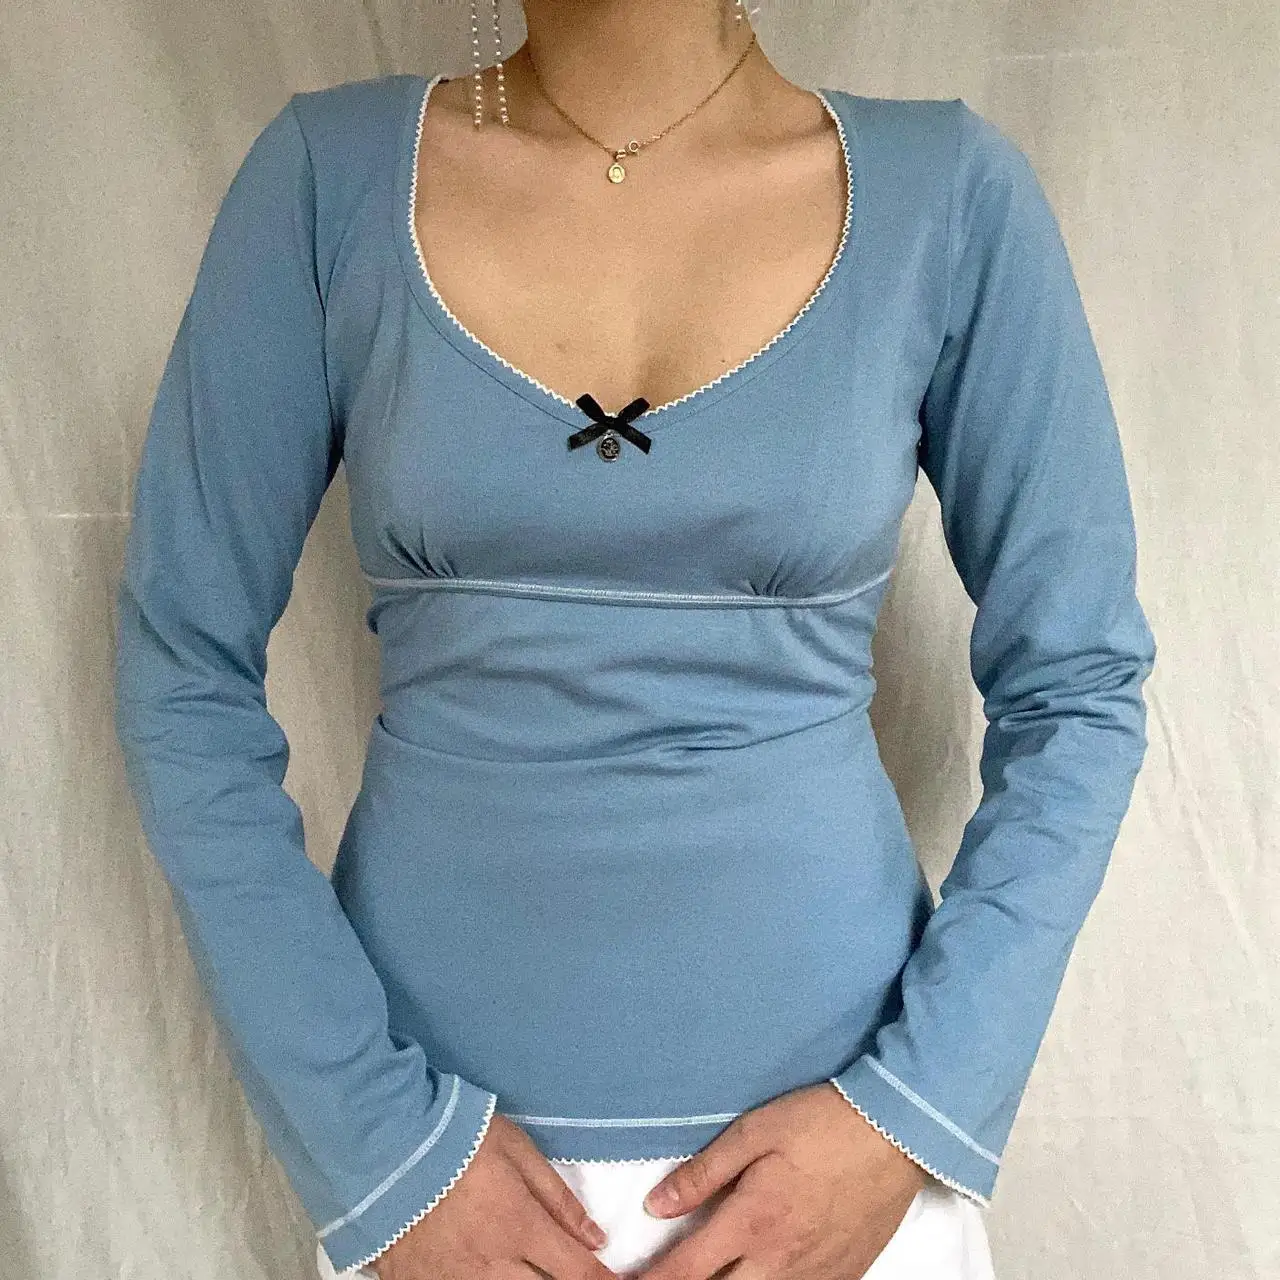 

New Womens Spring Autumn Slim Tops Blue Long Sleeve Low Cut T-Shirt With Bowknot Decor Casual Everyday Wear Skin Friendly S M L